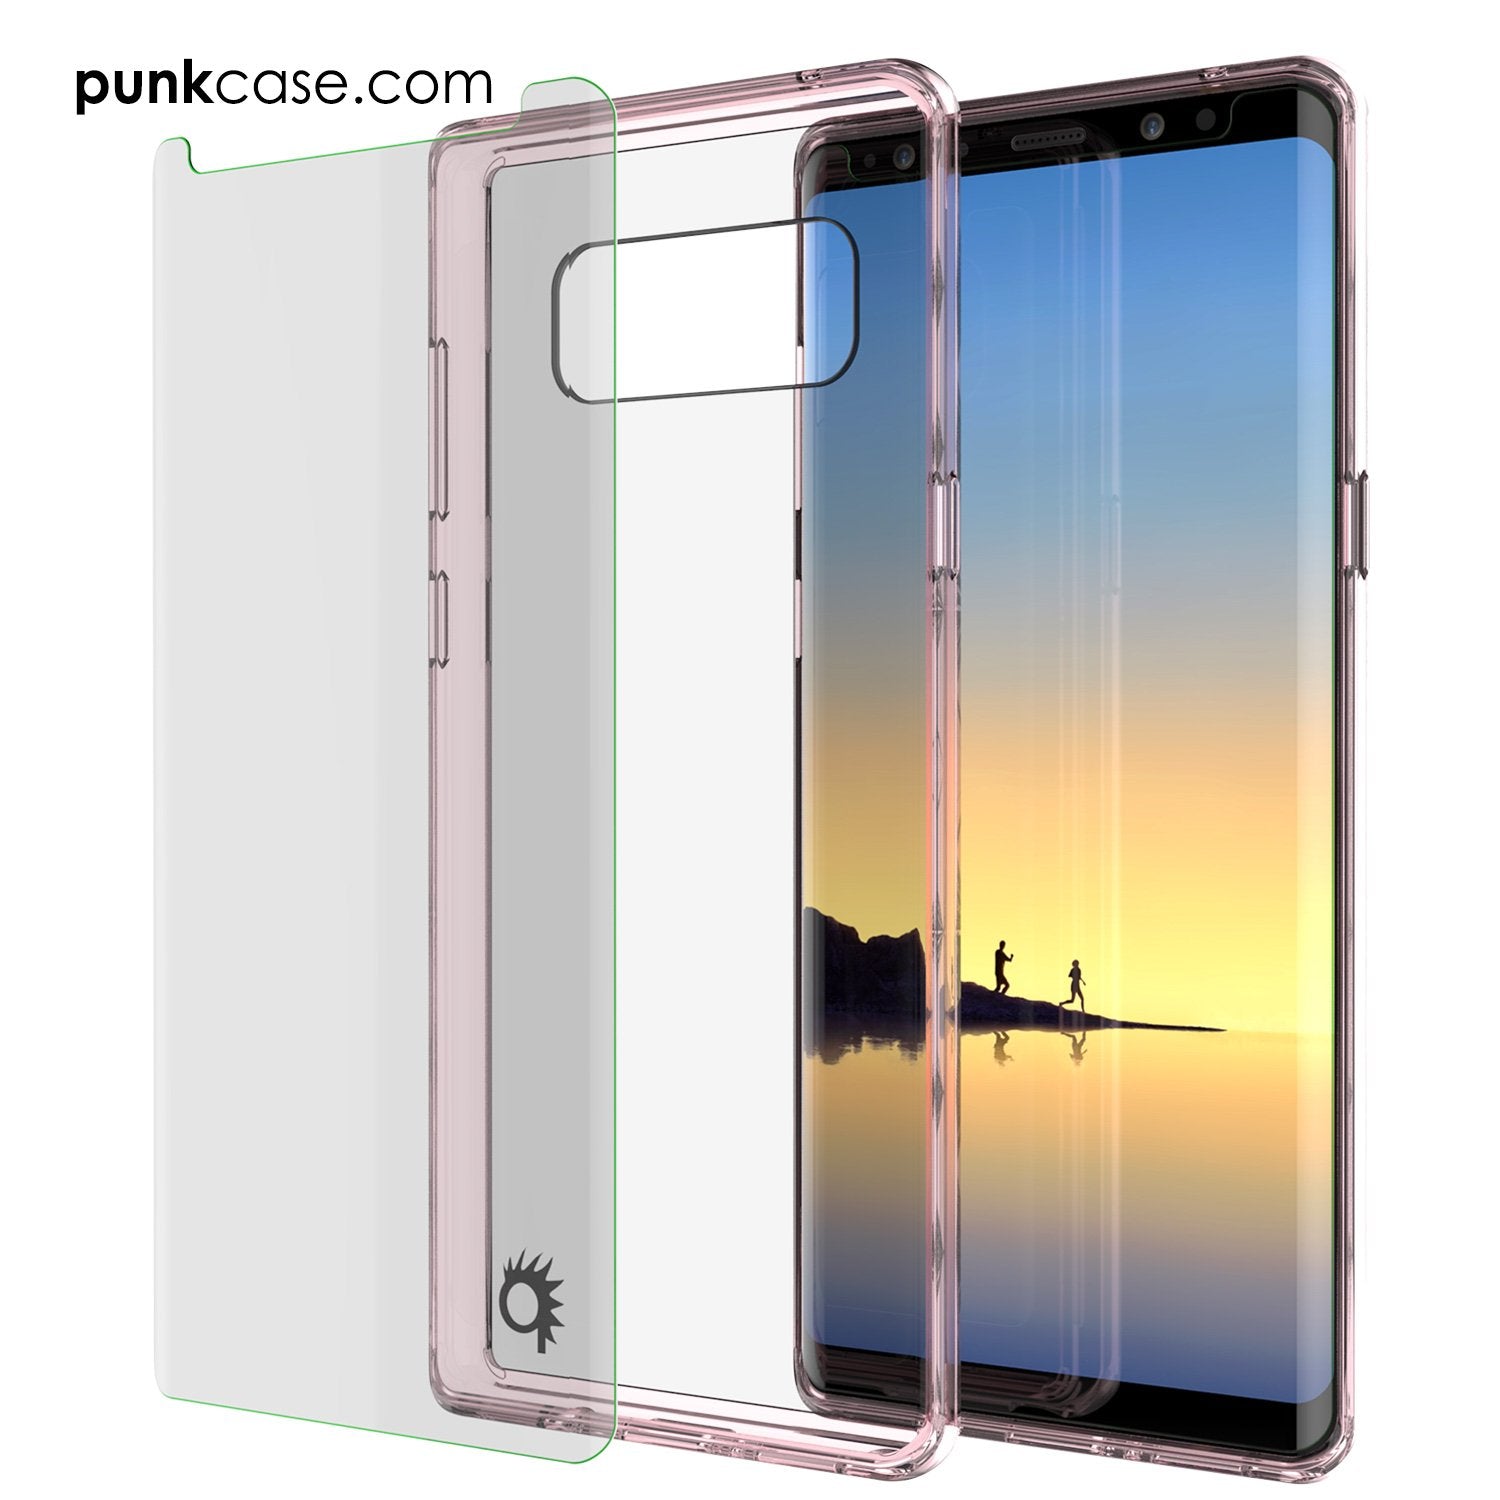 Galaxy Note 8 Case, PUNKcase [LUCID 2.0 Series] [Slim Fit] Armor Cover w/Integrated Anti-Shock System & PUNKSHIELD Screen Protector [Crystal Pink]